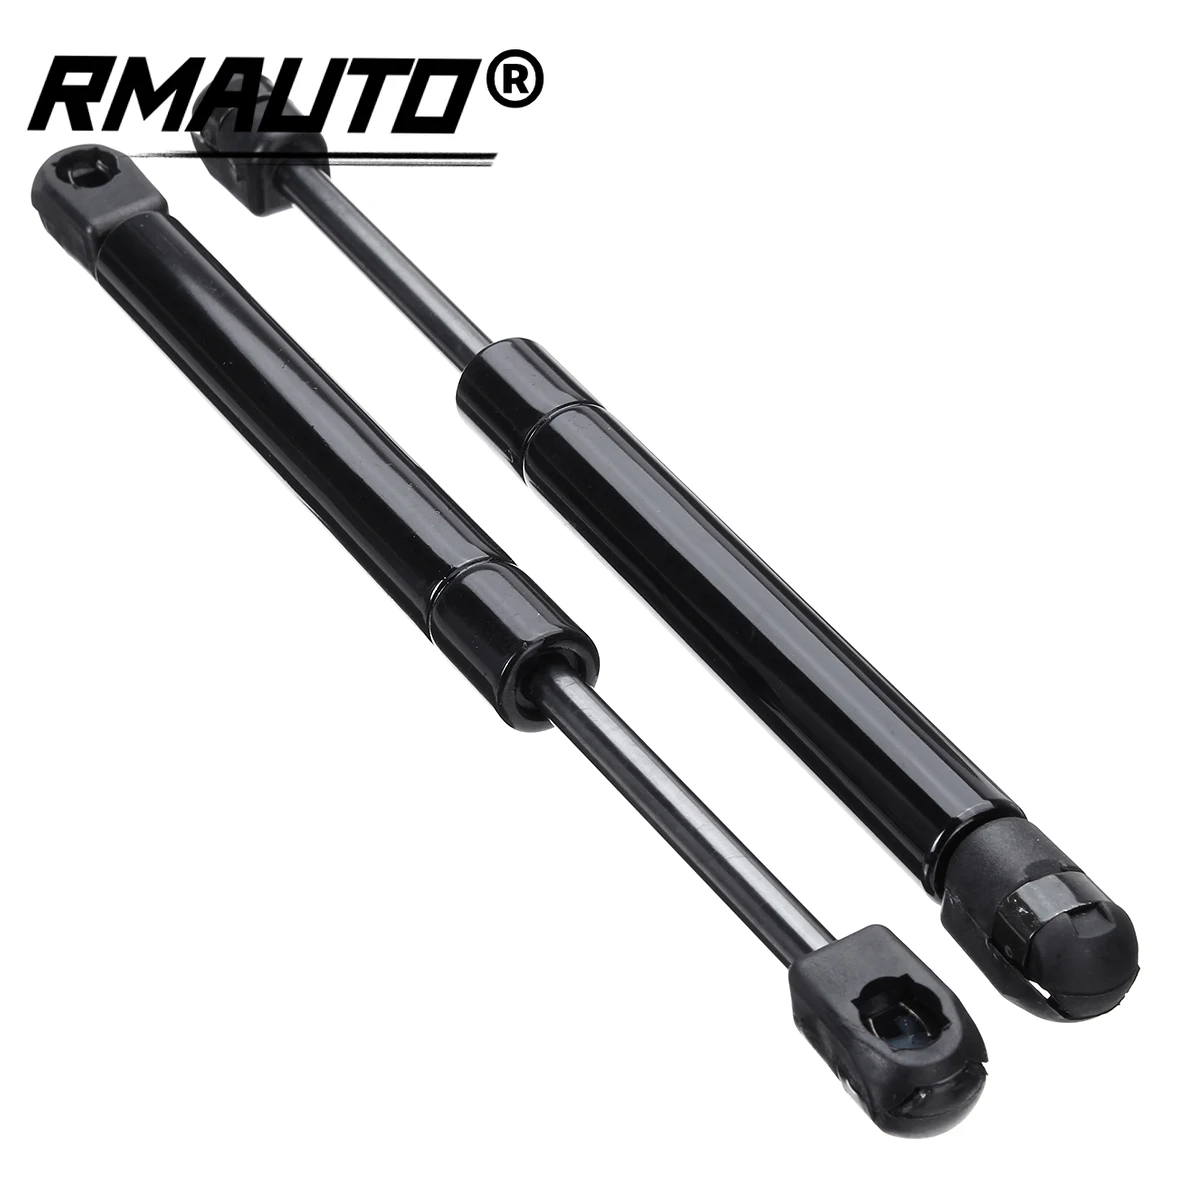 

RMAUTO 2Pcs Car Tailgate Trunk Boot Gas Spring Strut Bars Support Lift BN8W56930 For Mazda 3 2004-2009 BN8V56930 BN8W56930A